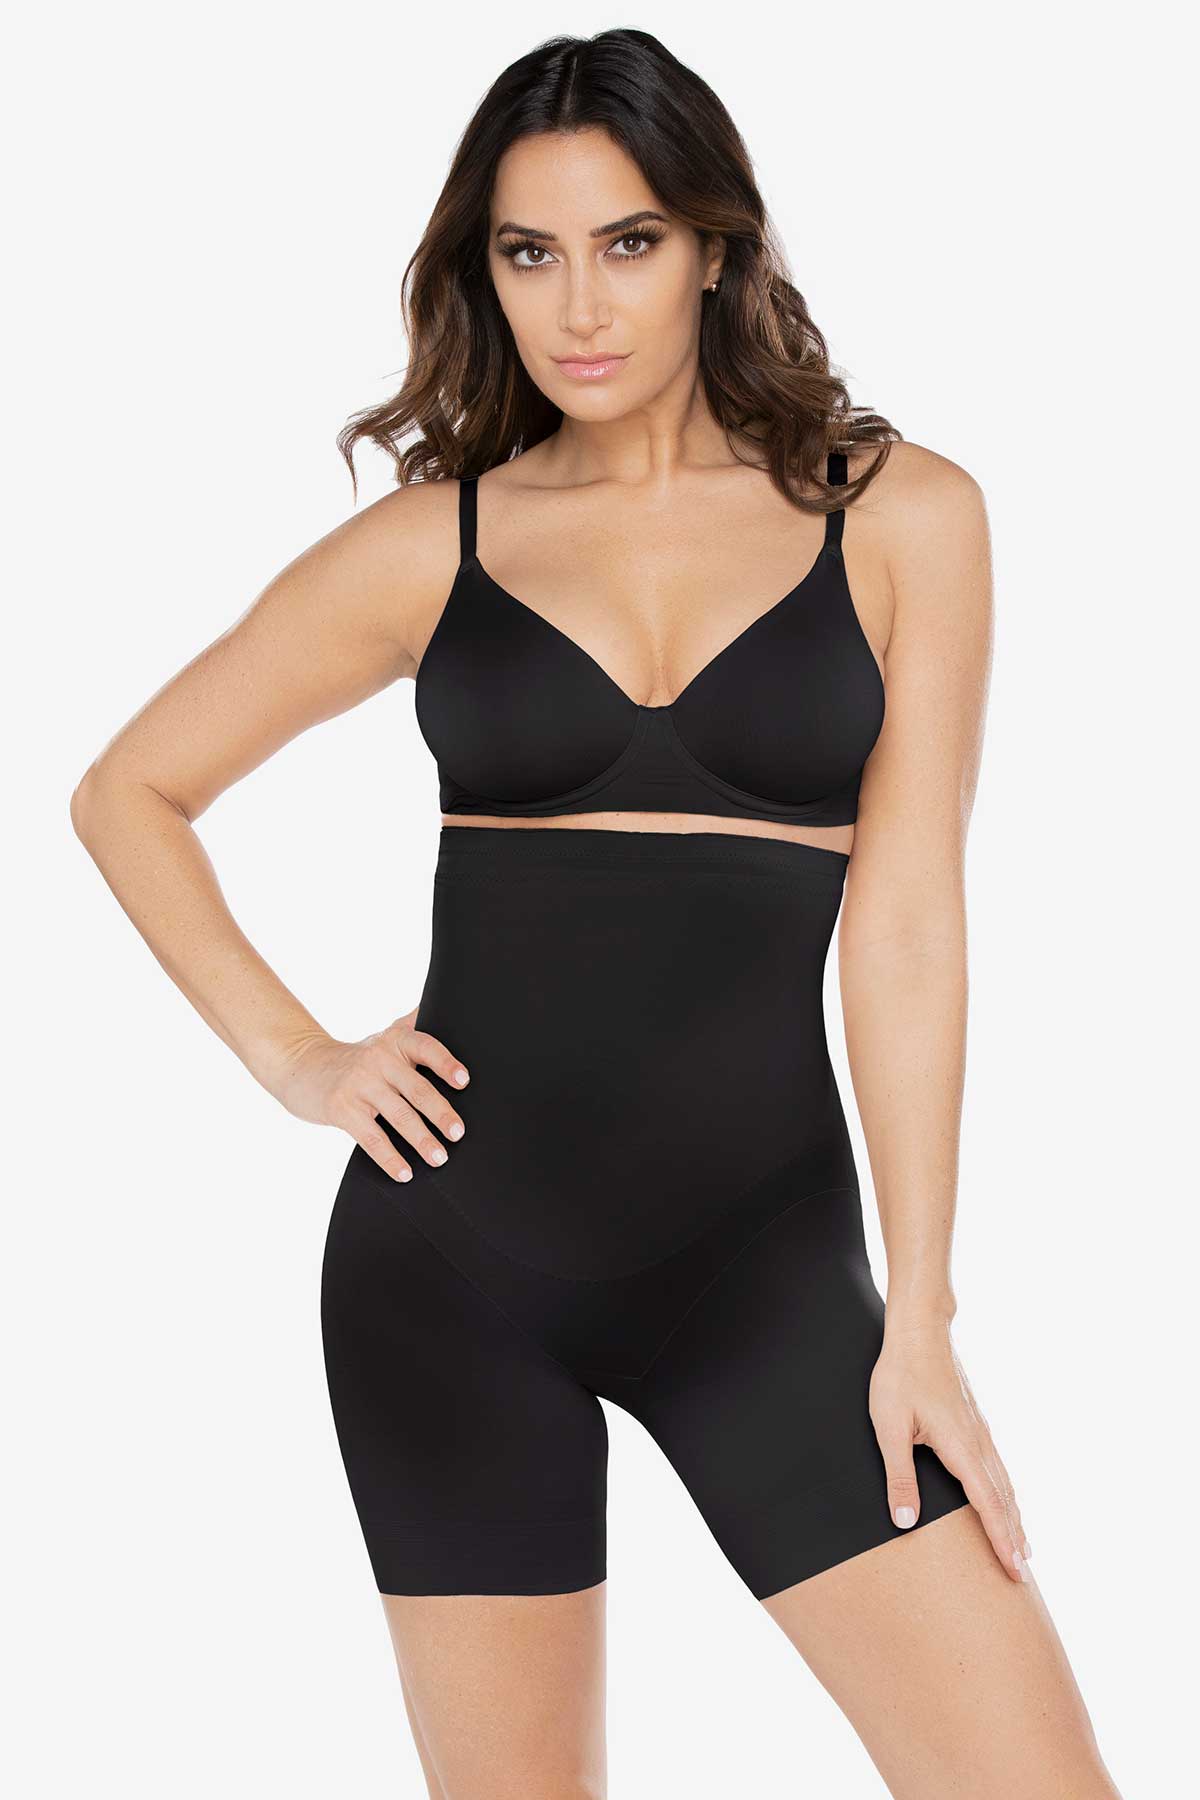 Superform slimming body suit/shaper✓ Ultra firm control